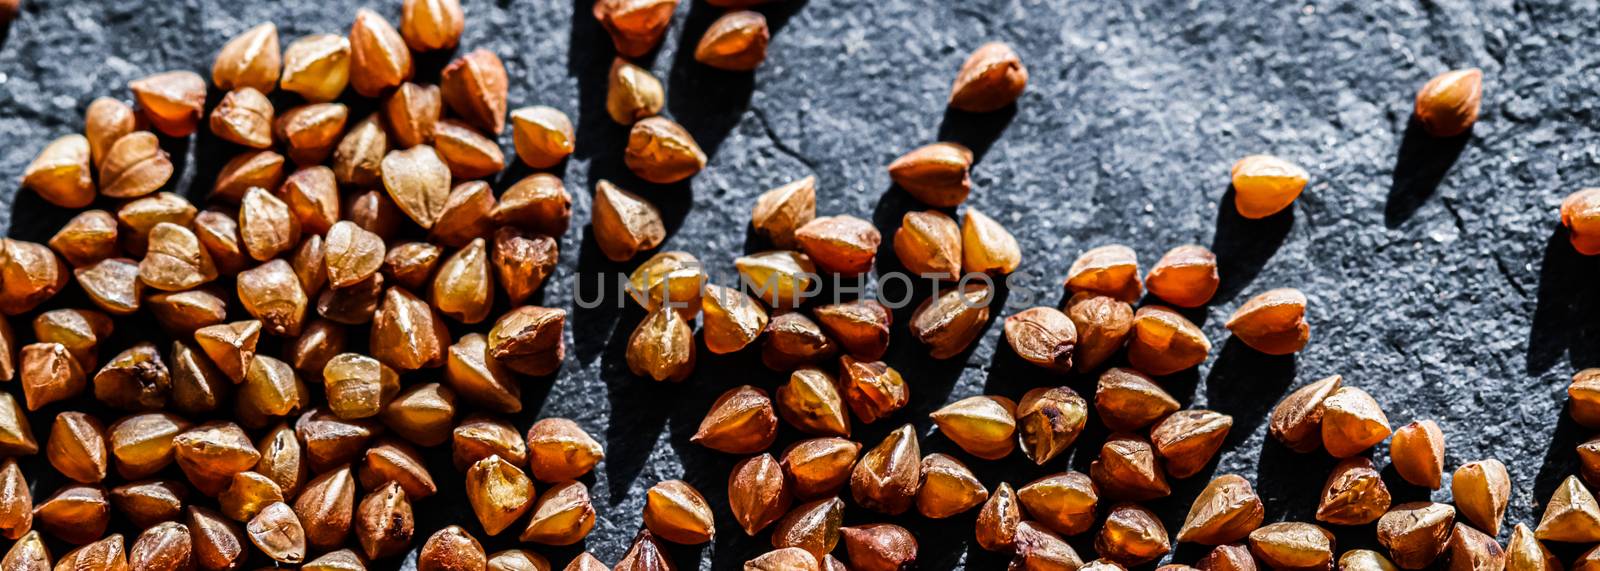 Buckwheat grain closeup, food texture and cook book background by Anneleven